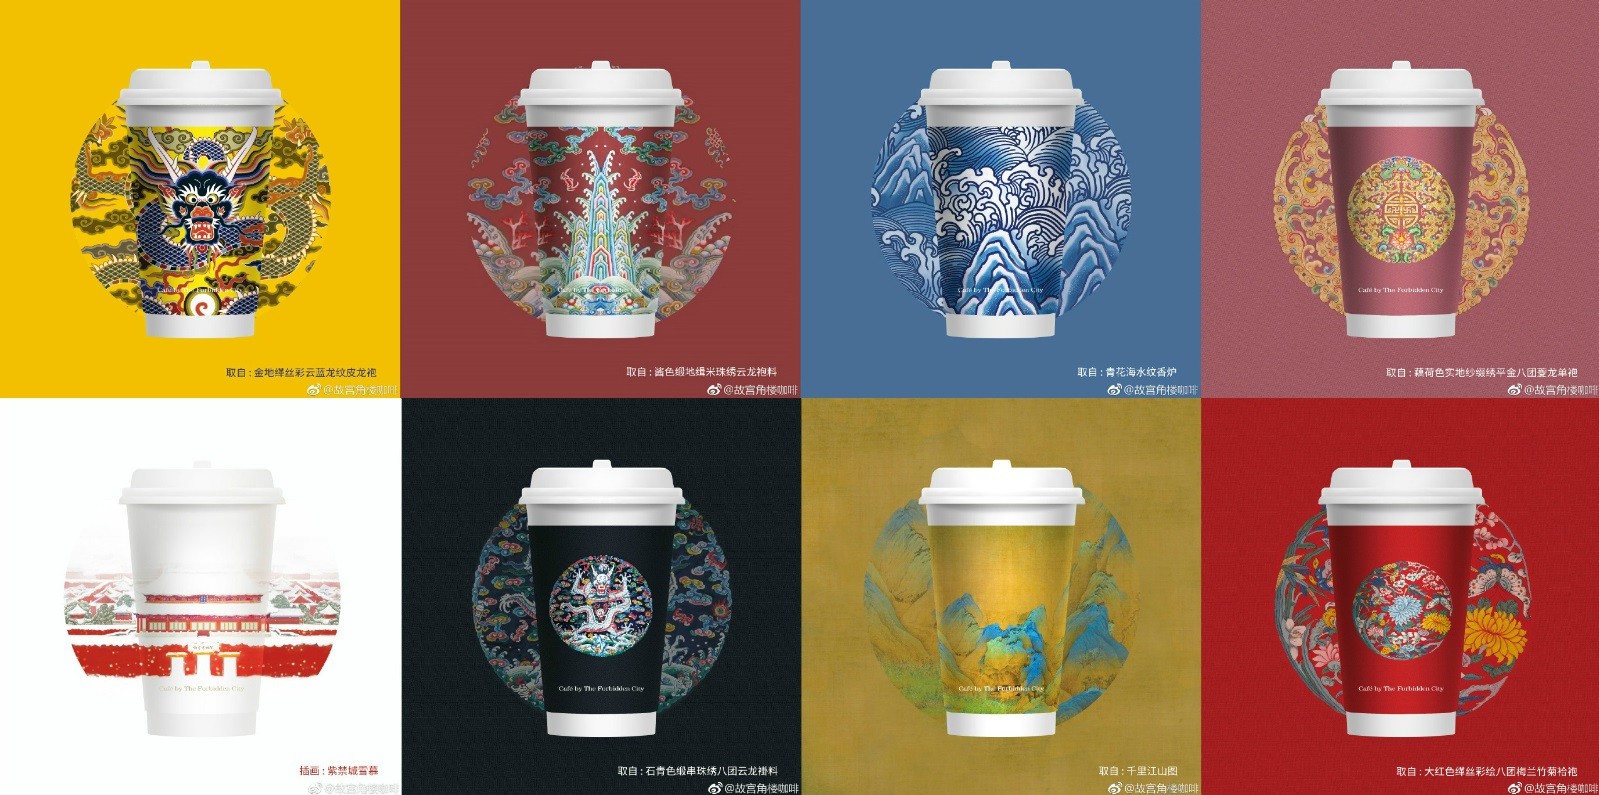 Beijing Imperial Palace coffee cup 